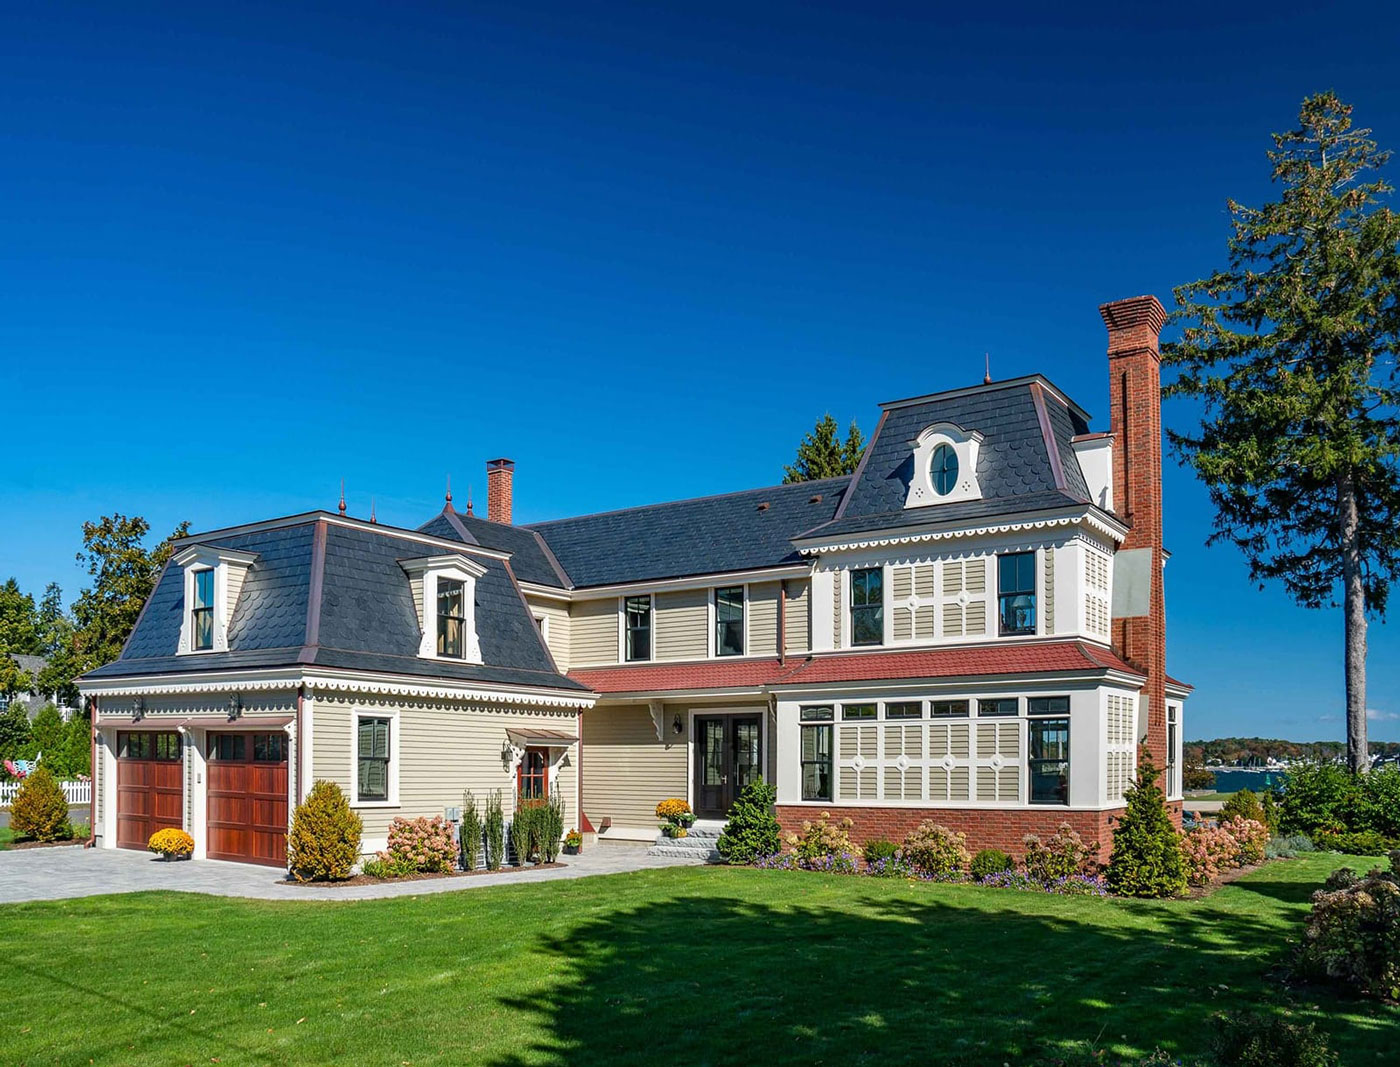 Buena Vista Victorian, New Castle NH, Cummings Architecture + Interiors; Chiocca Homes; Eric Roth Photography